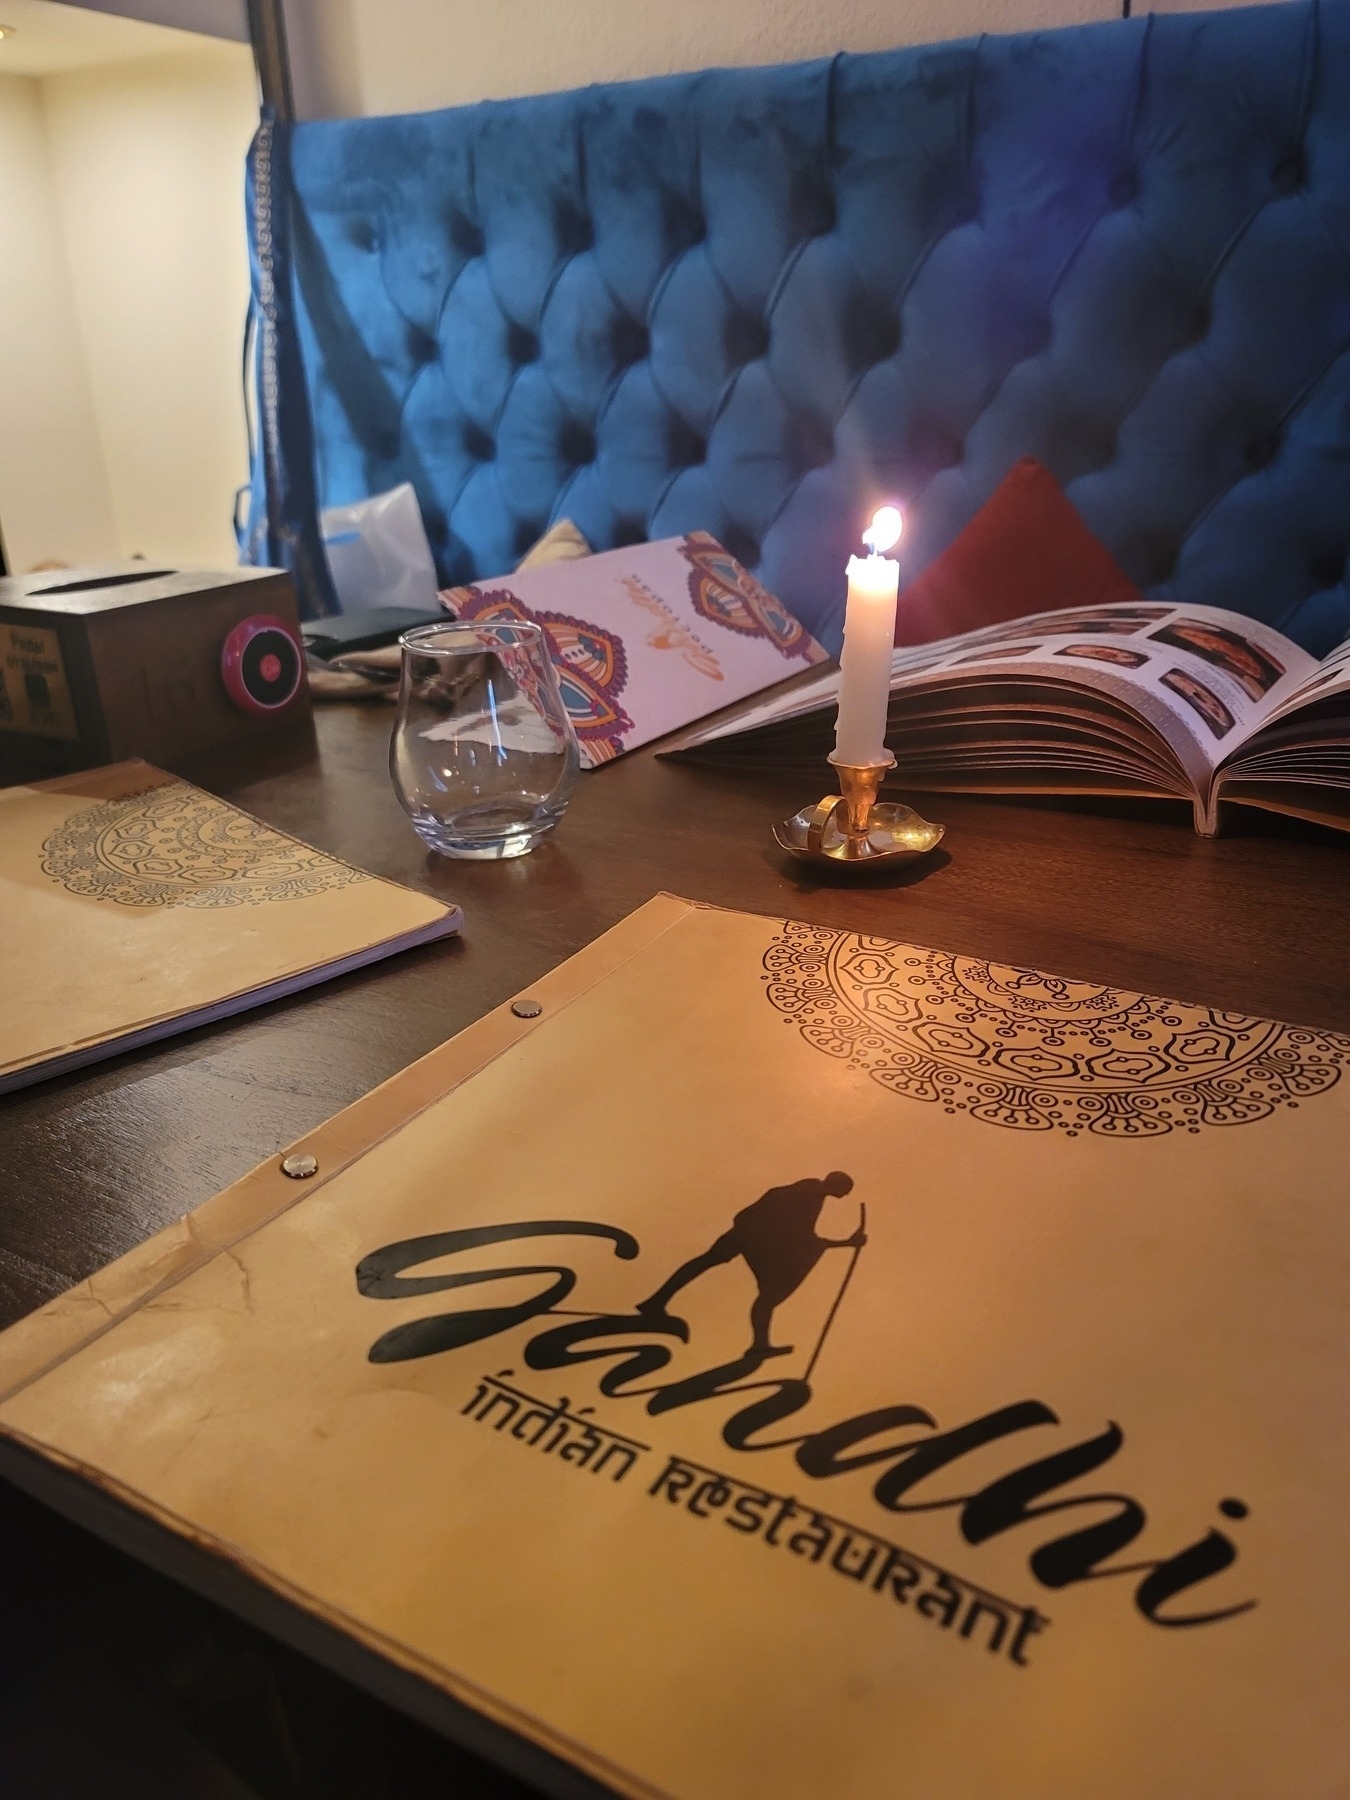 table for four with a blue cushioned booth seat, 4 menus on the table with 2 open, 1 closed menu showing the name of the restaurant (Gandhi) and a candle in the center